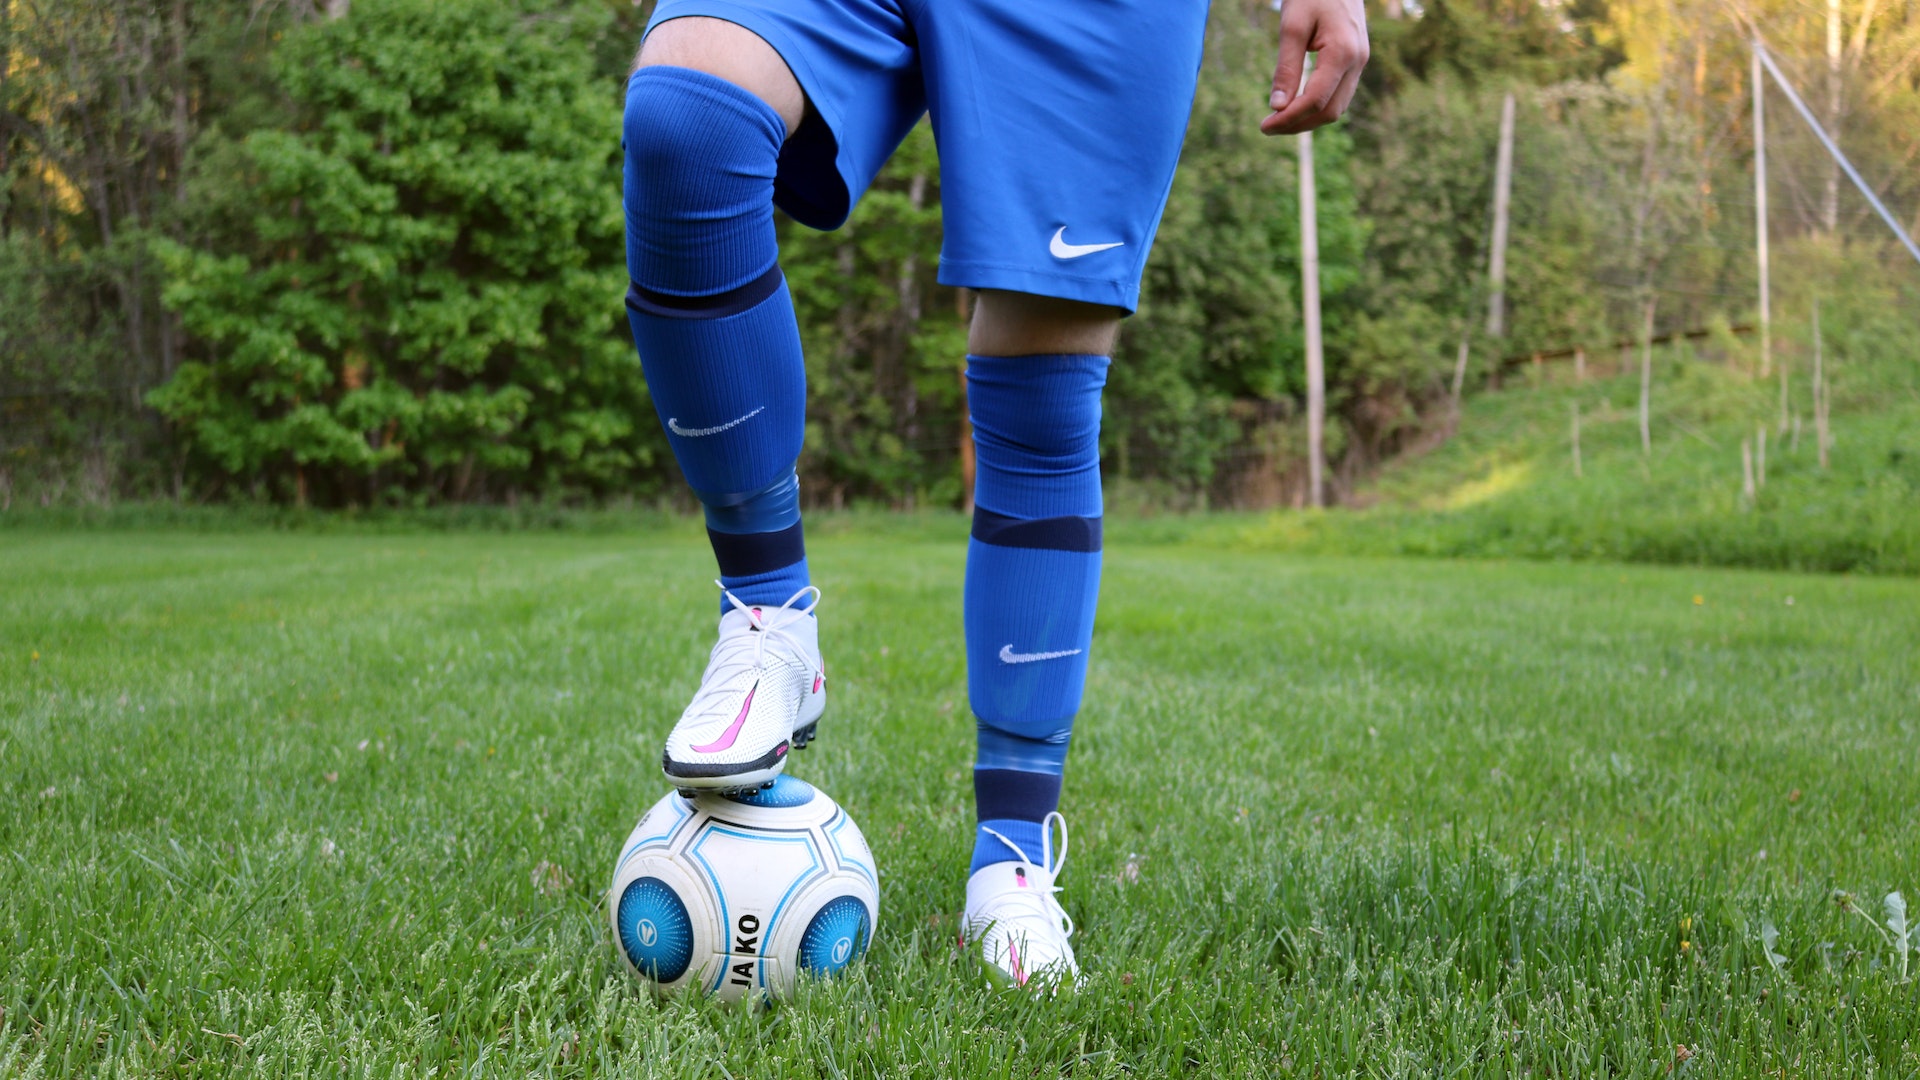 A person holding a soccer ball under his foot | Source: Pexels